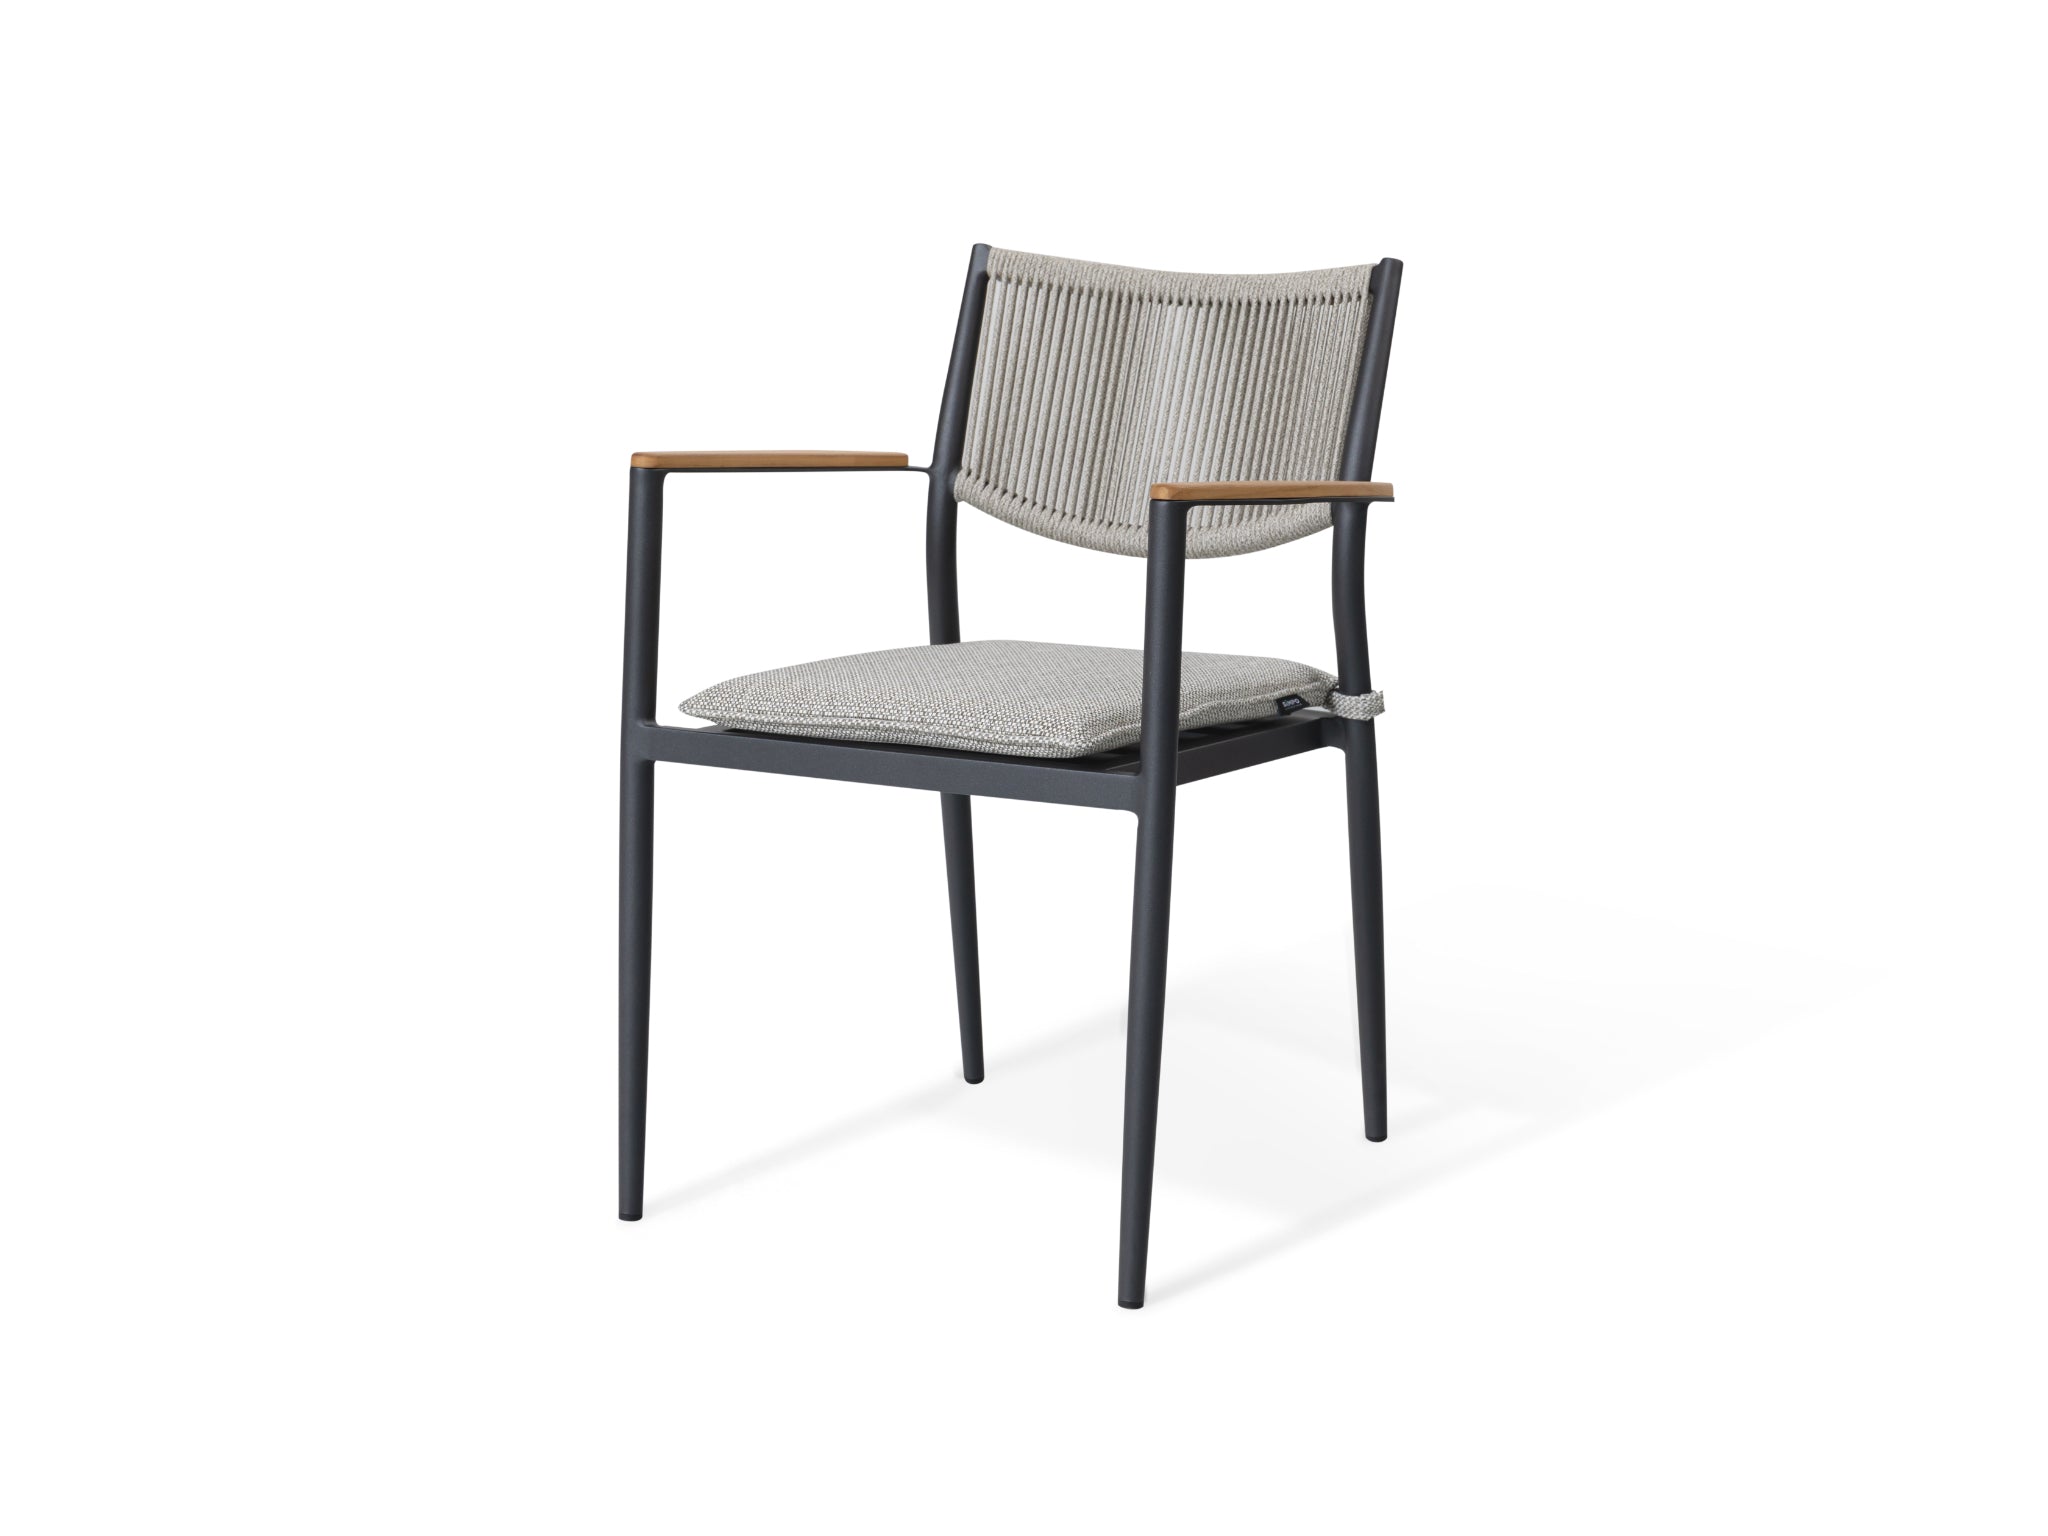 SIMPO by Sunlongarden Timmi Dining Chair